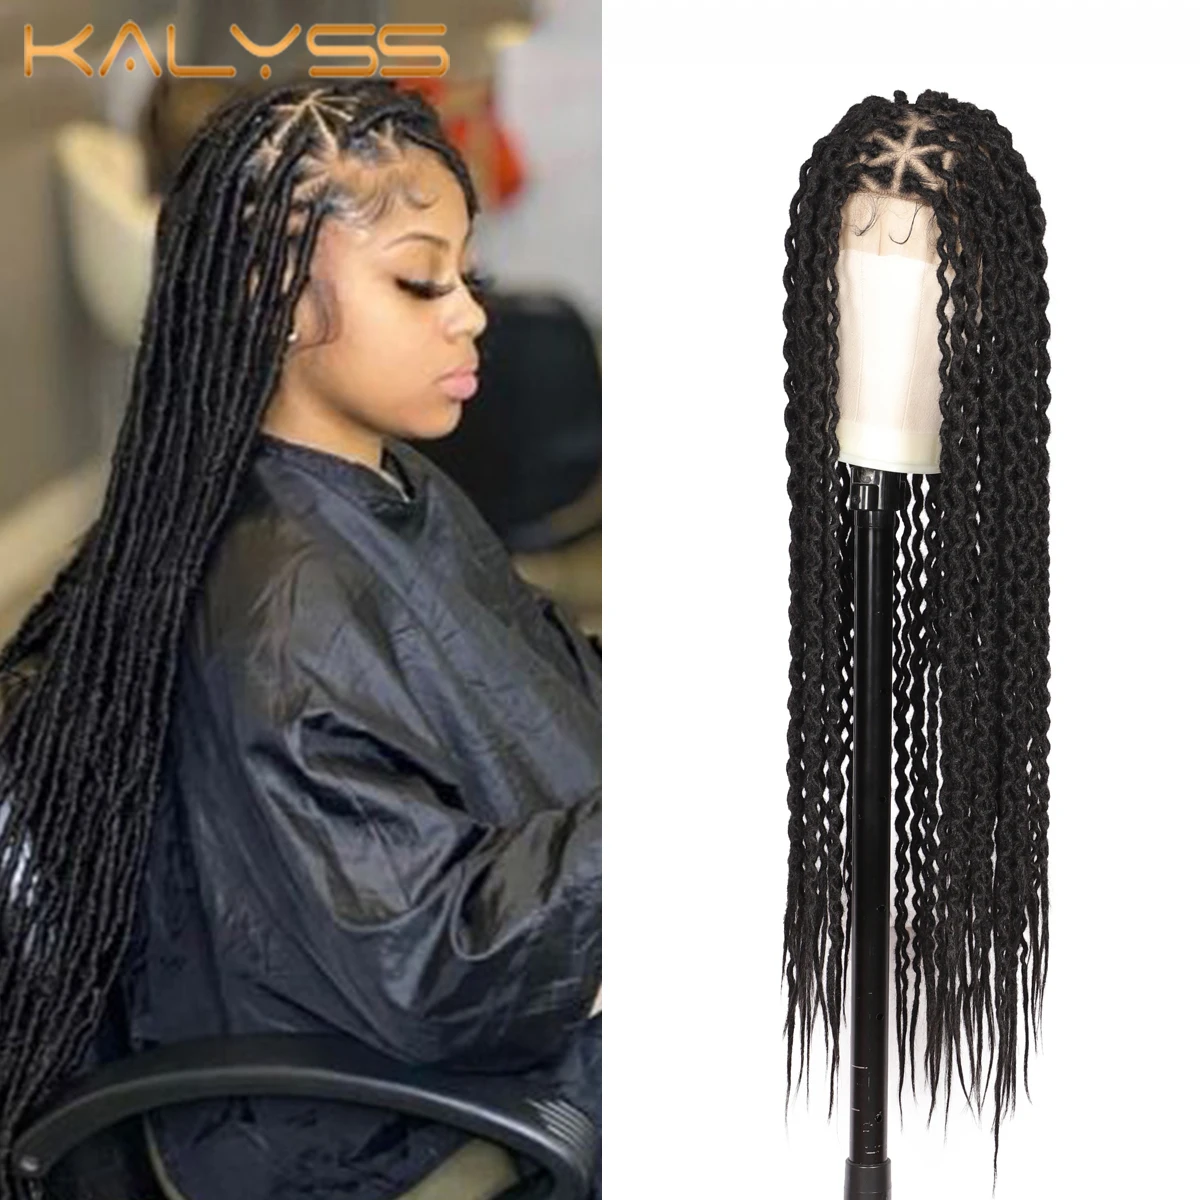 Kalyss 36" Full Lace Front Loc Braided Wigs With Baby Hair Triangle Knotless Dreadlock Braid Hair Synthetic Wig For Black Women